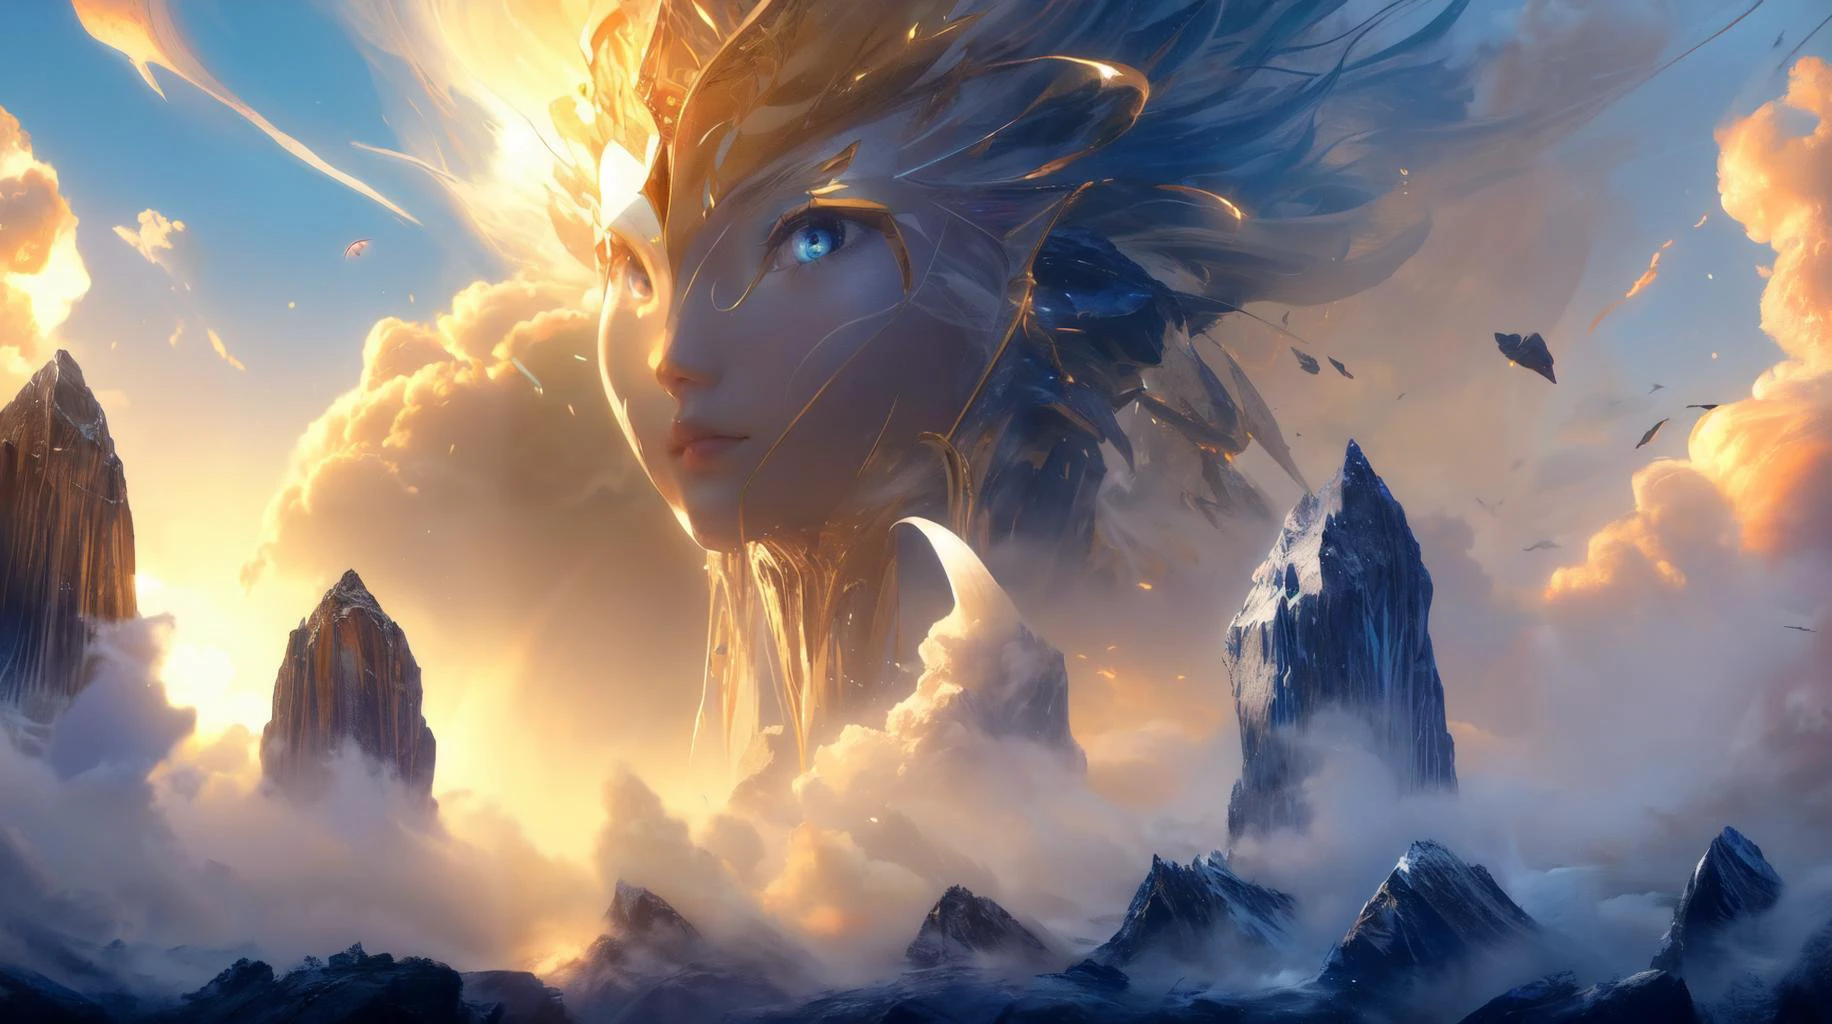 (masterpiece, best quality, fullscreen), [(full body:0.9)::0.3] portrait (photo of a [cloud,wind] [magical being:creature:0.4]:1.3), intricate iris, (two Large eyes:1.3), (Scaled:0.9), (Fairy Wings:1.2), (very long white hair:[1.2:0.1:0.2]), {5::(Spider body shape:1.1), (Shark head:0.9), (one huge Tentacles:1)|(human form with Rhinoceros Horns:0.9), (l2cloakV2:1.1), DonMW15p, (strong wind visible through ink cloud Turbulence :1.2), (background representing Glacier and Icefall:1.3), (Cerulean Blue Golden Hour Light:1.2), simple smoke, (embedding:VIEW_Style-BlurFore), (look at the viewer:0.9), , kkw-HDR, (Full body Shot, Shallow Focus Shot, Low Angle Shot:[1.2:0.5:0.1]), heavily detailed, , (asymmetric composition:1.5), (sharp focus), fakemtg, (no humans), intricate, elegant, highly detailed, digital painting, artstation, concept art, smooth, sharp focus, epic landscape,PHOTOS